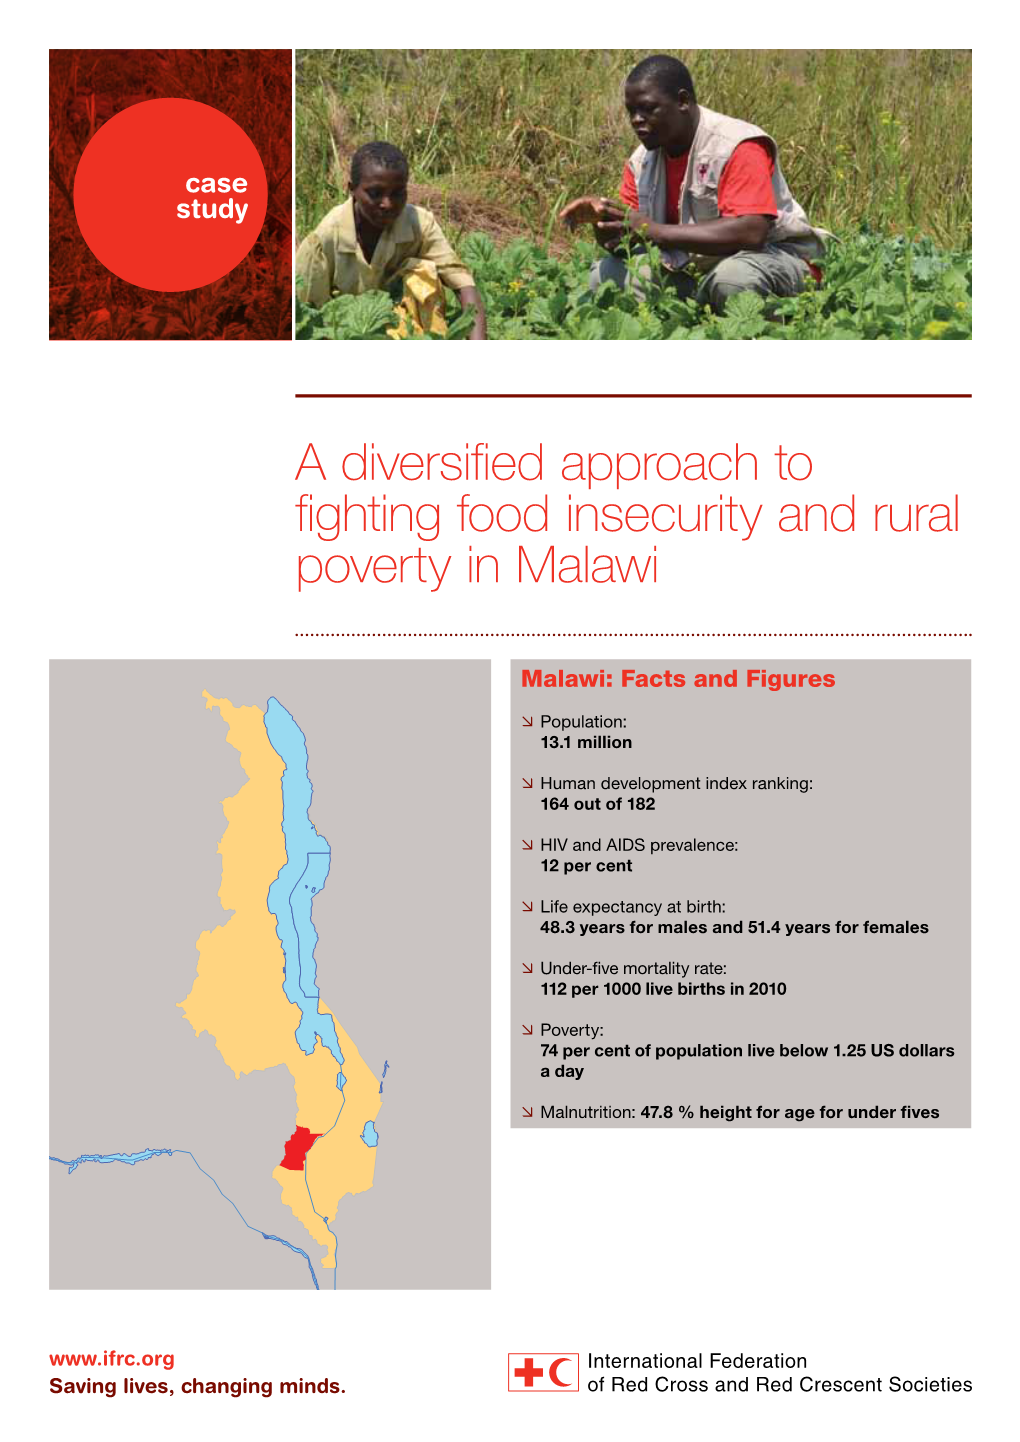 A Diversified Approach to Fighting Food Insecurity and Rural Poverty in Malawi